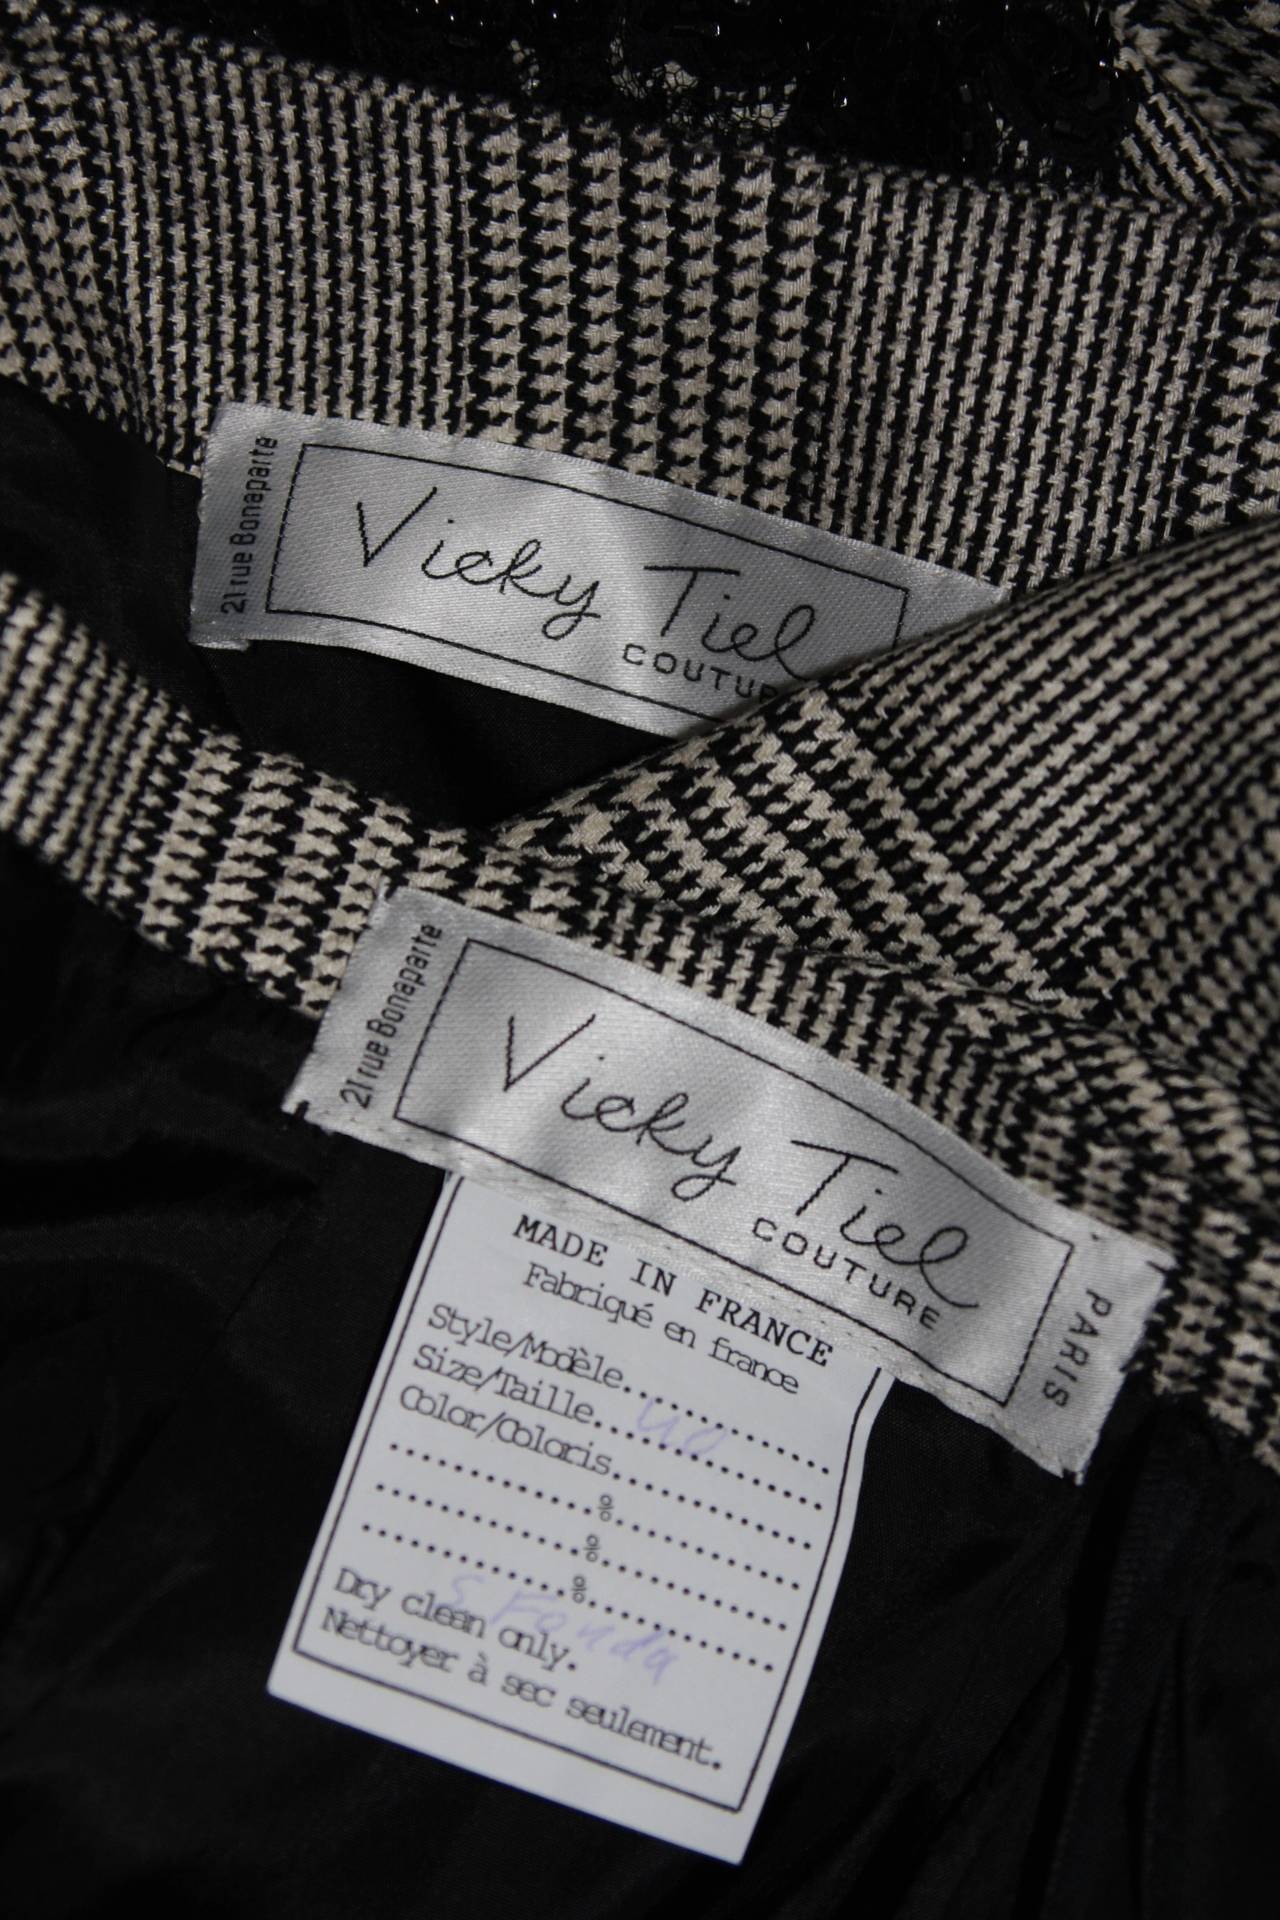 Vicky Tiel Black and White Houndstooth Print Skirt Suit With Lace Size 40 6